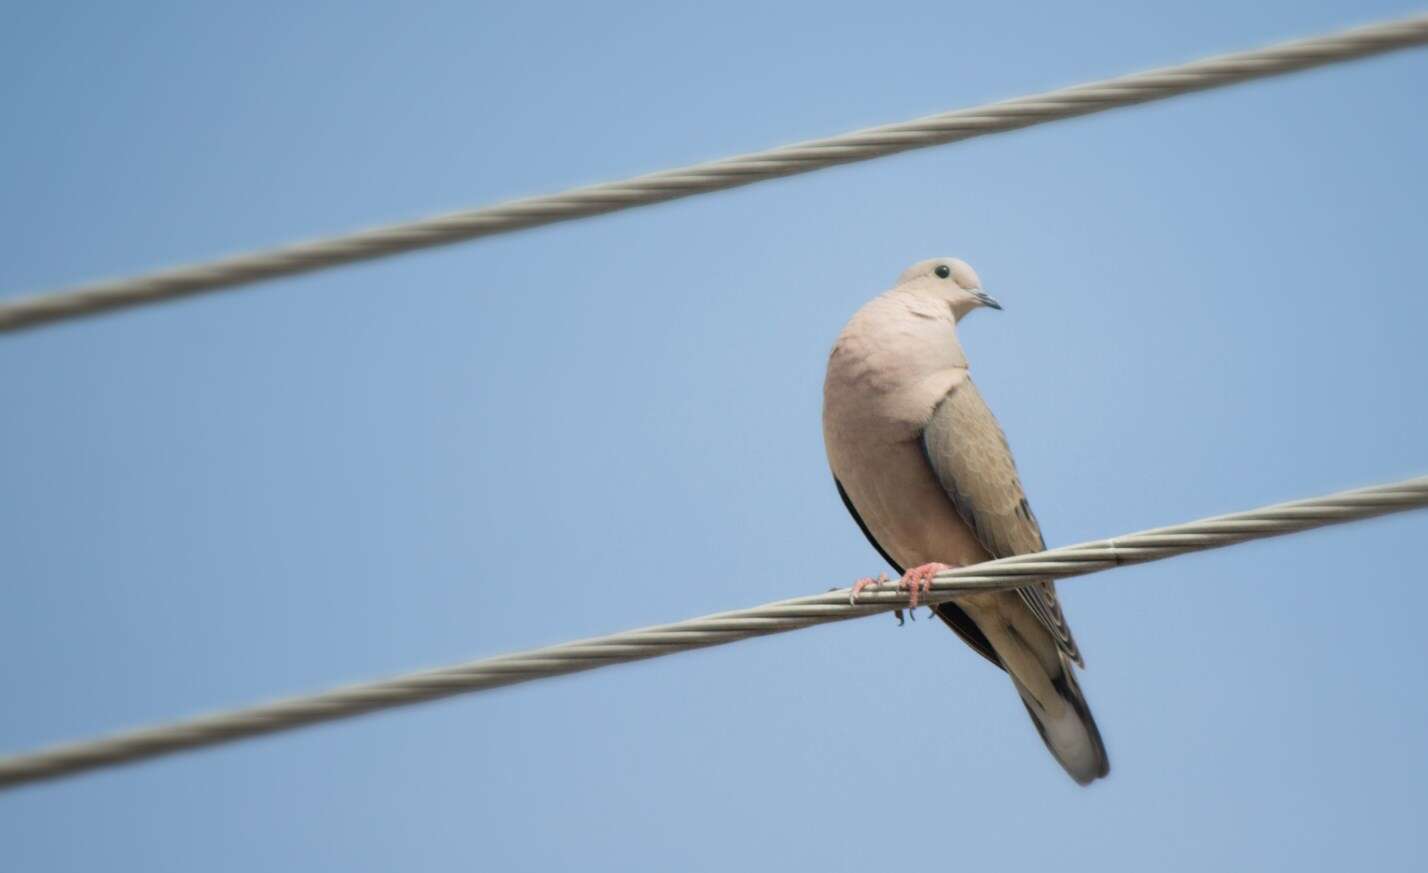 Image of Eared Dove